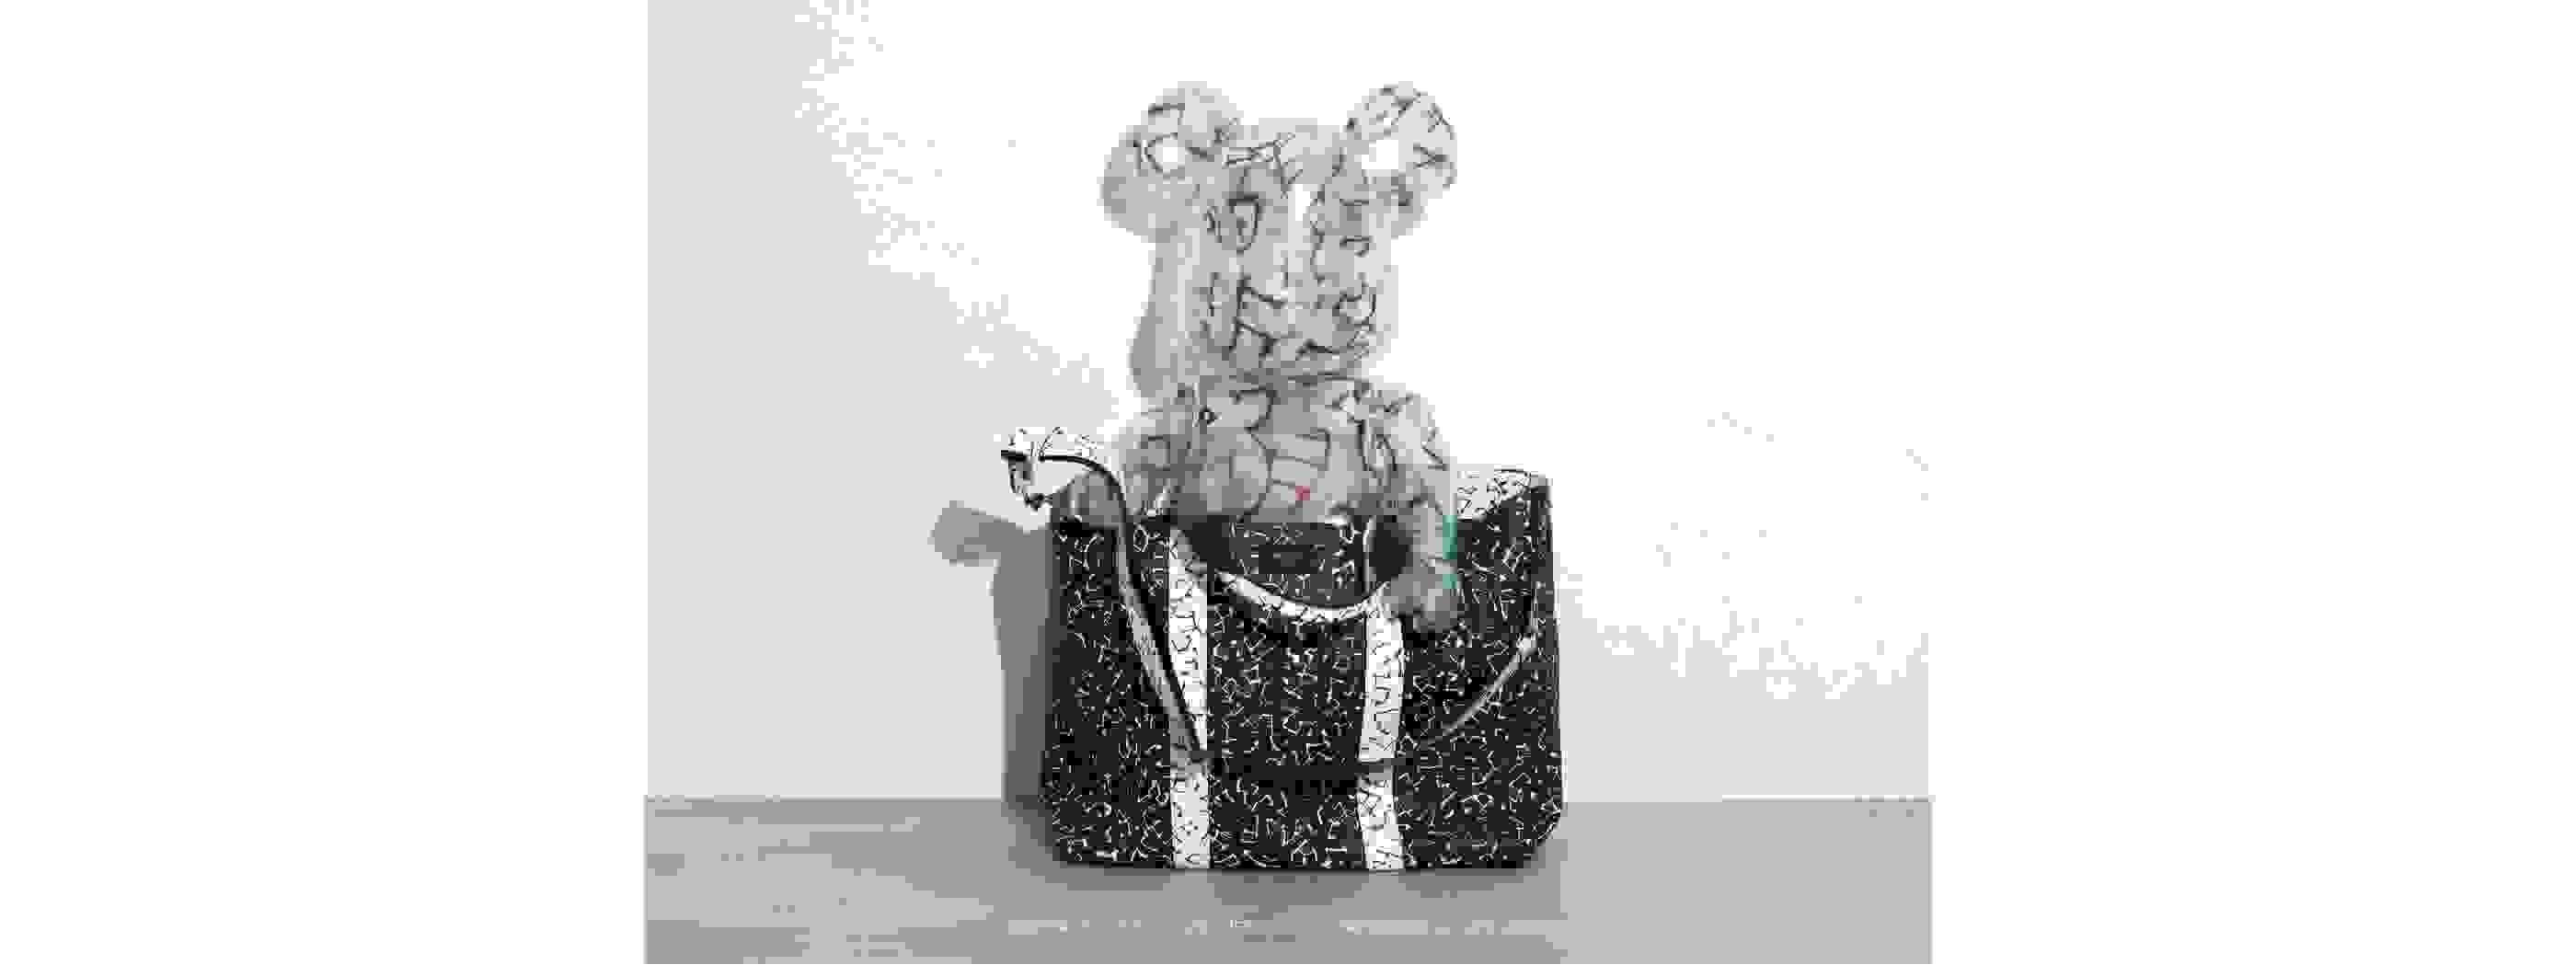 BE@RBRICK ｘ JIMMY CHOO / ERIC HAZE CURATED BY POGGY